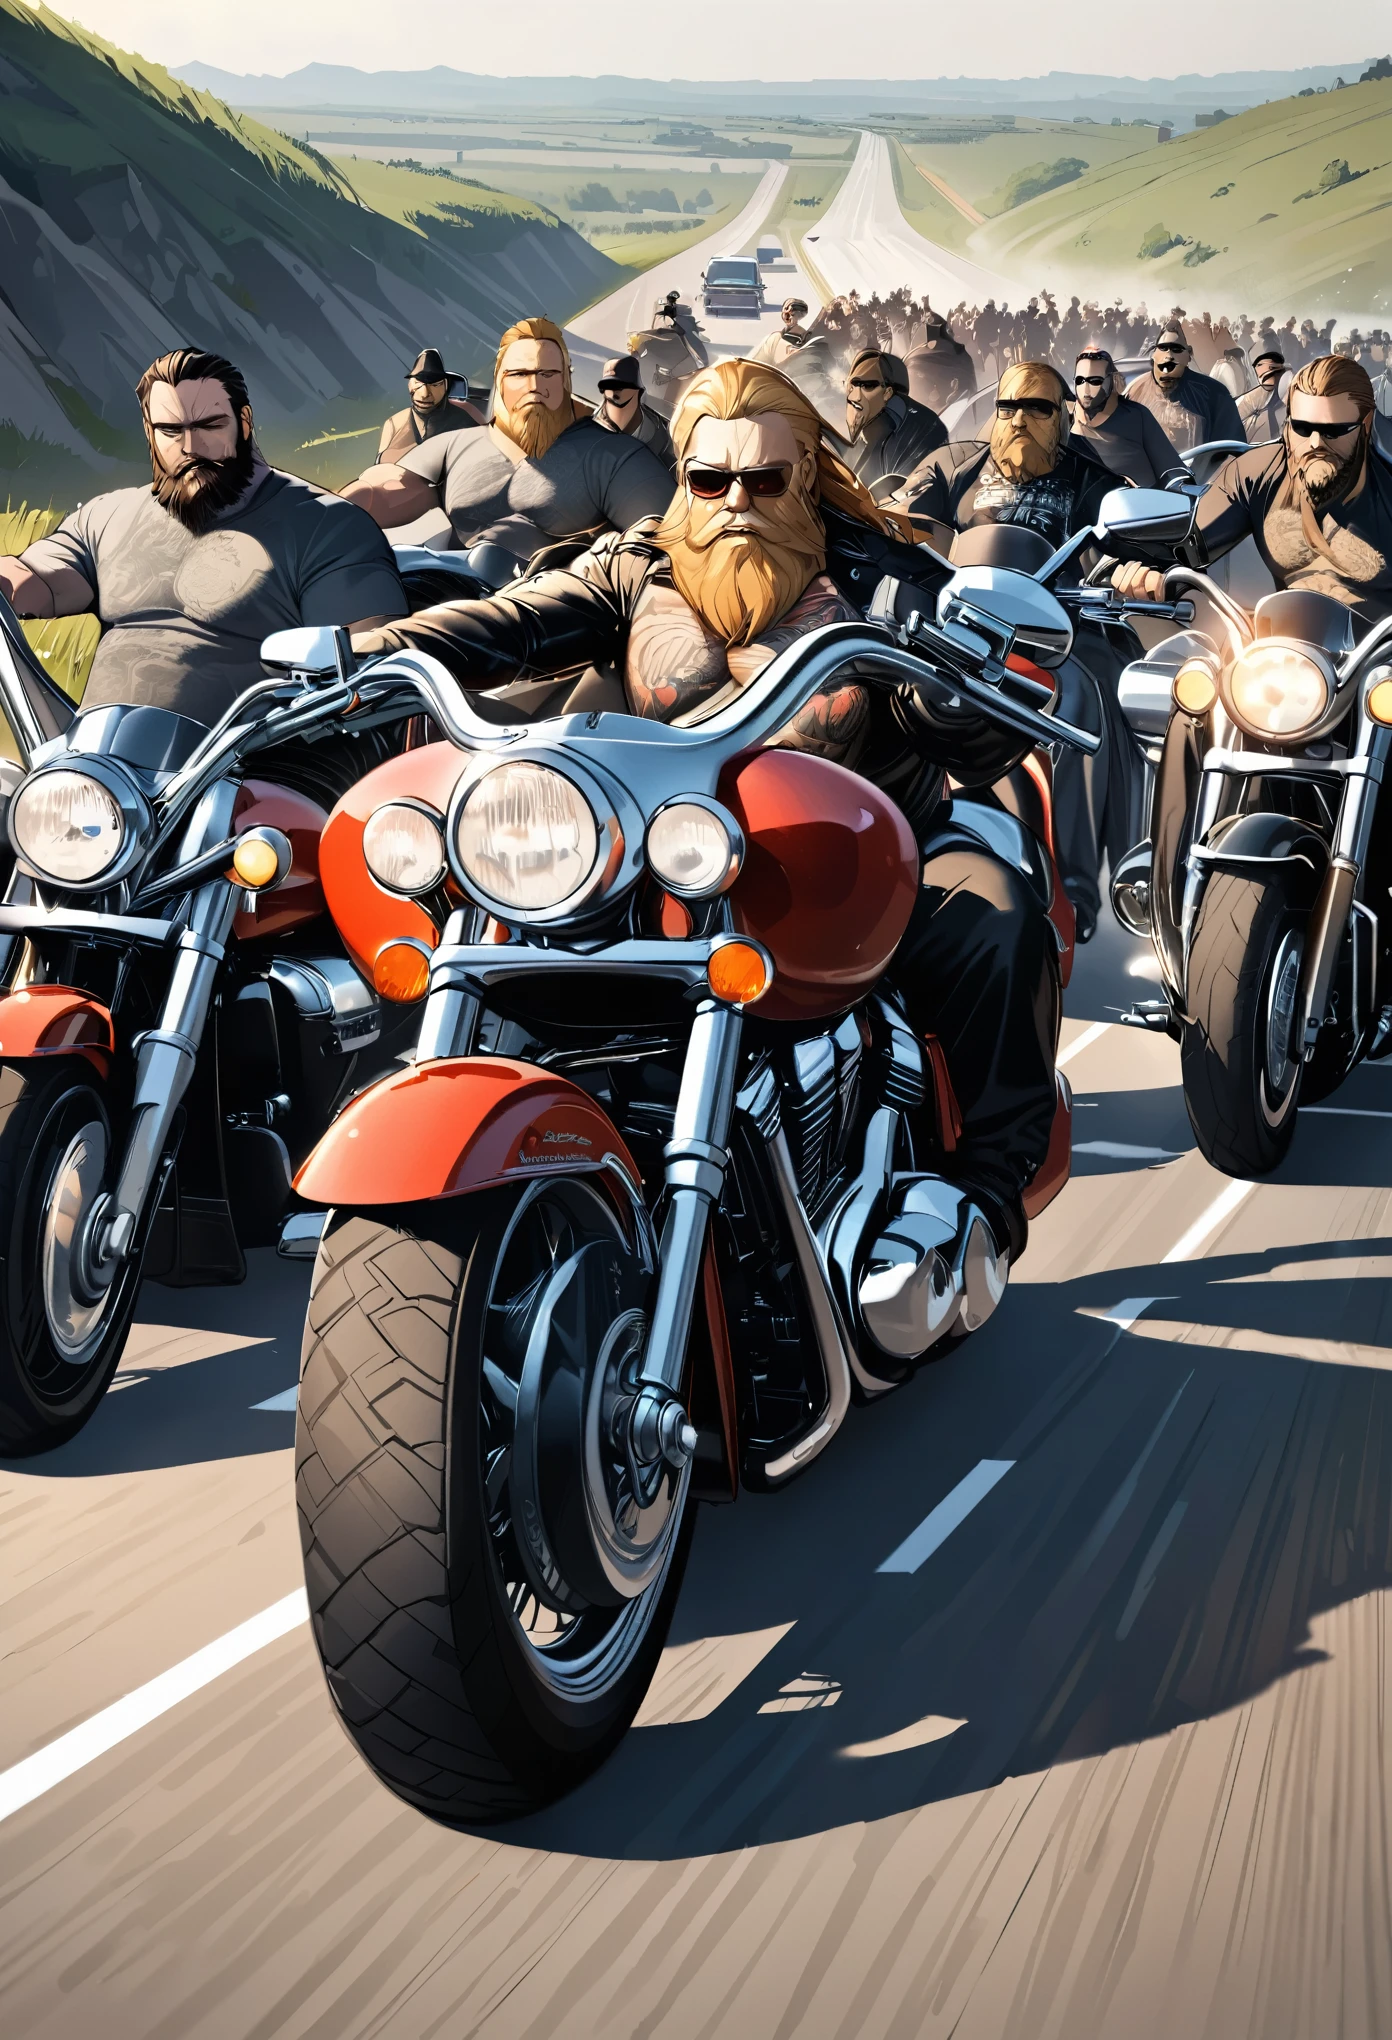 best quality, super fine, 16k, incredibly absurdres, extremely detailed, 2.5D, delicate and dynamic depiction, huge group of Harley riders, blondes, beards, tattoos, leather clothing, the roads of the American Midwest